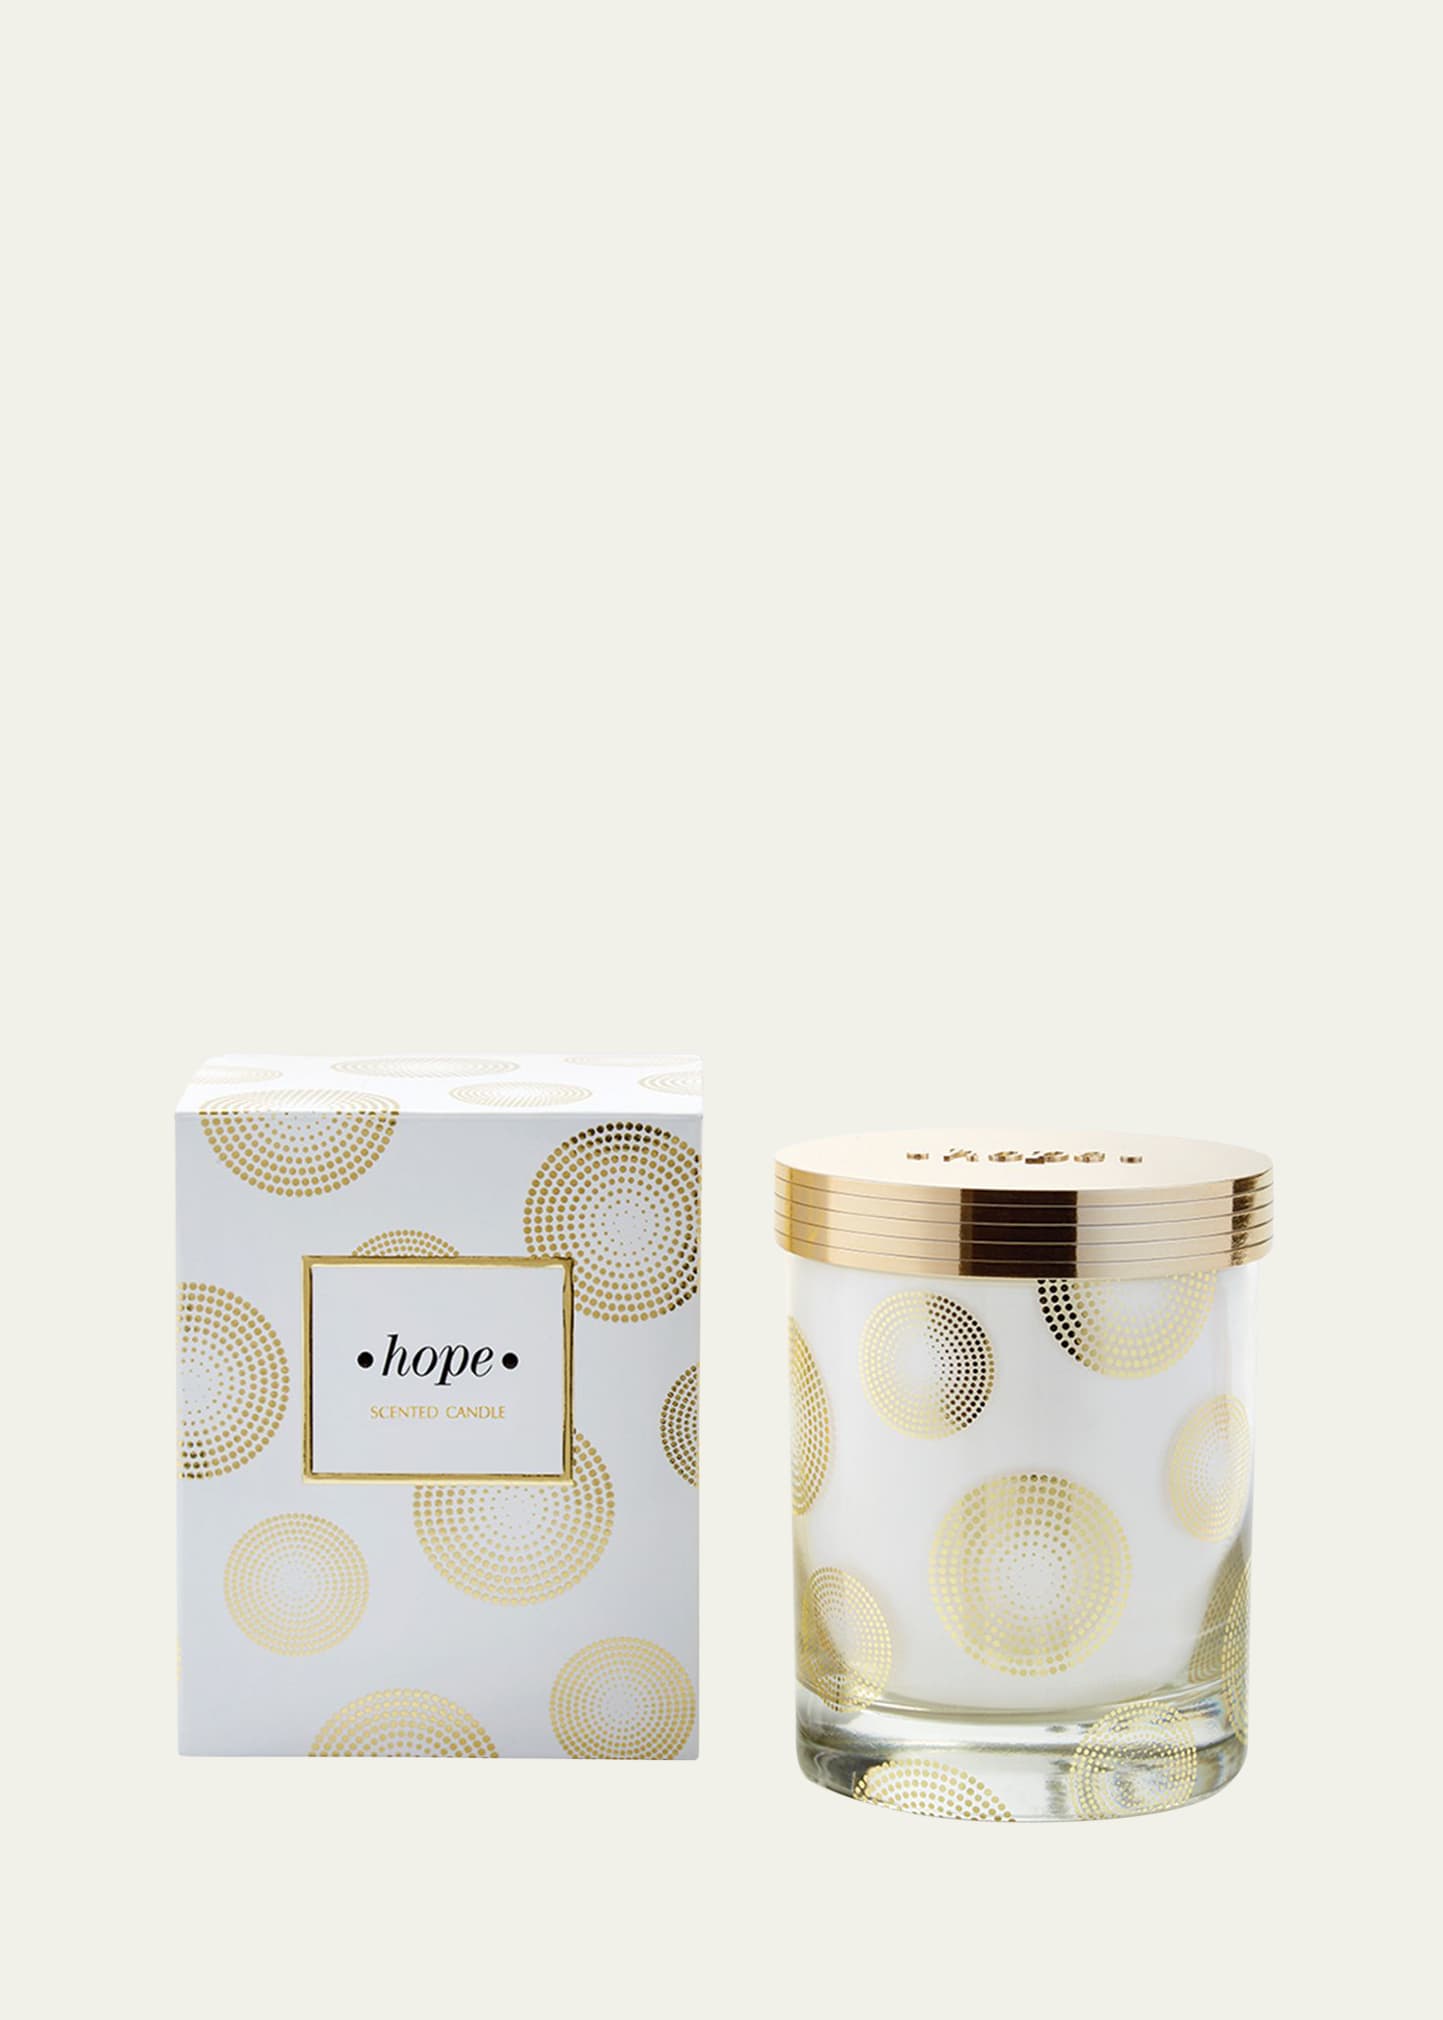 Hope Scented Candle, 8 oz. / 225 g